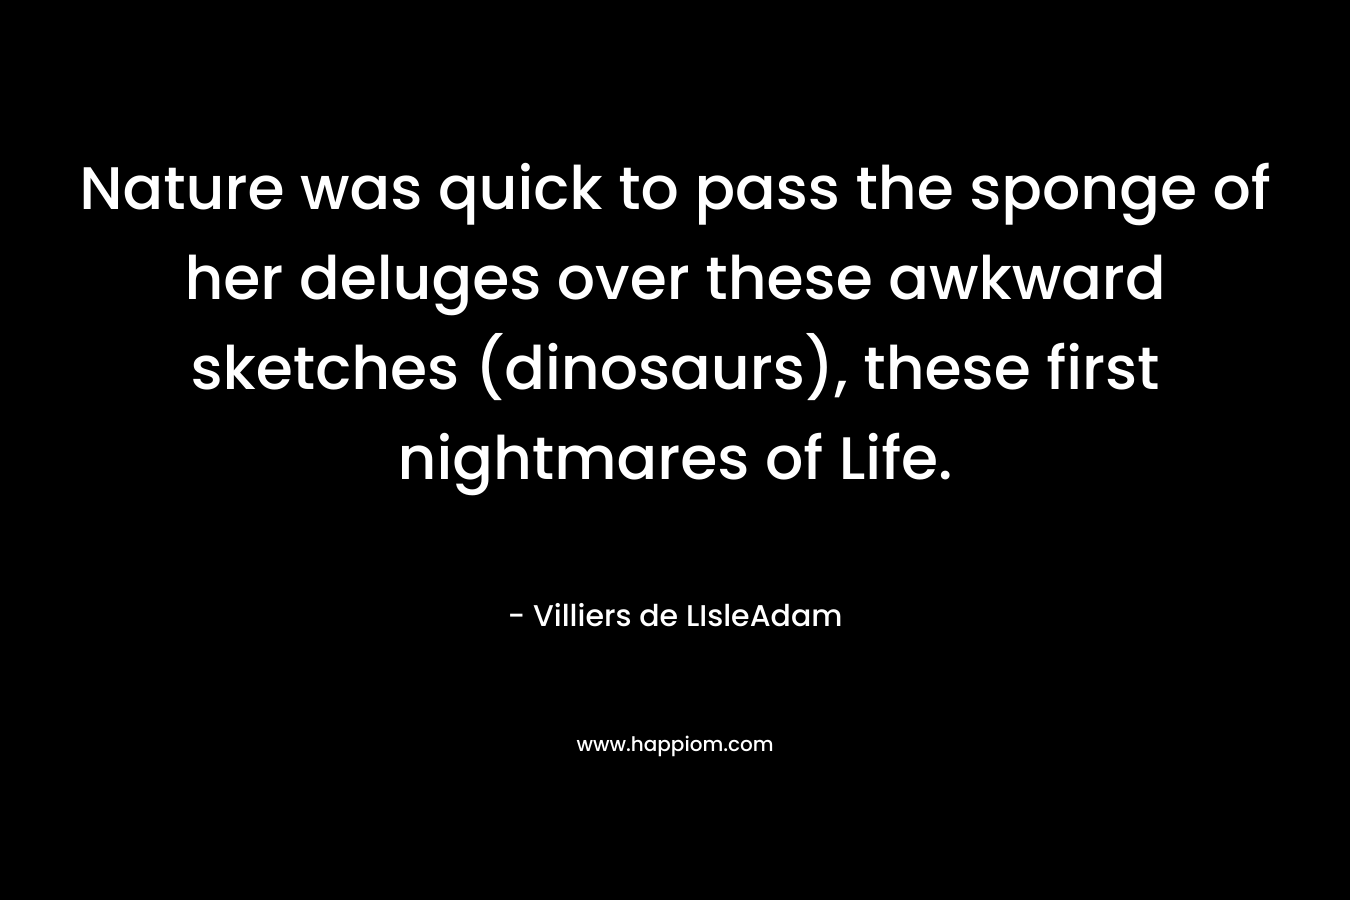 Nature was quick to pass the sponge of her deluges over these awkward sketches (dinosaurs), these first nightmares of Life. – Villiers de LIsleAdam